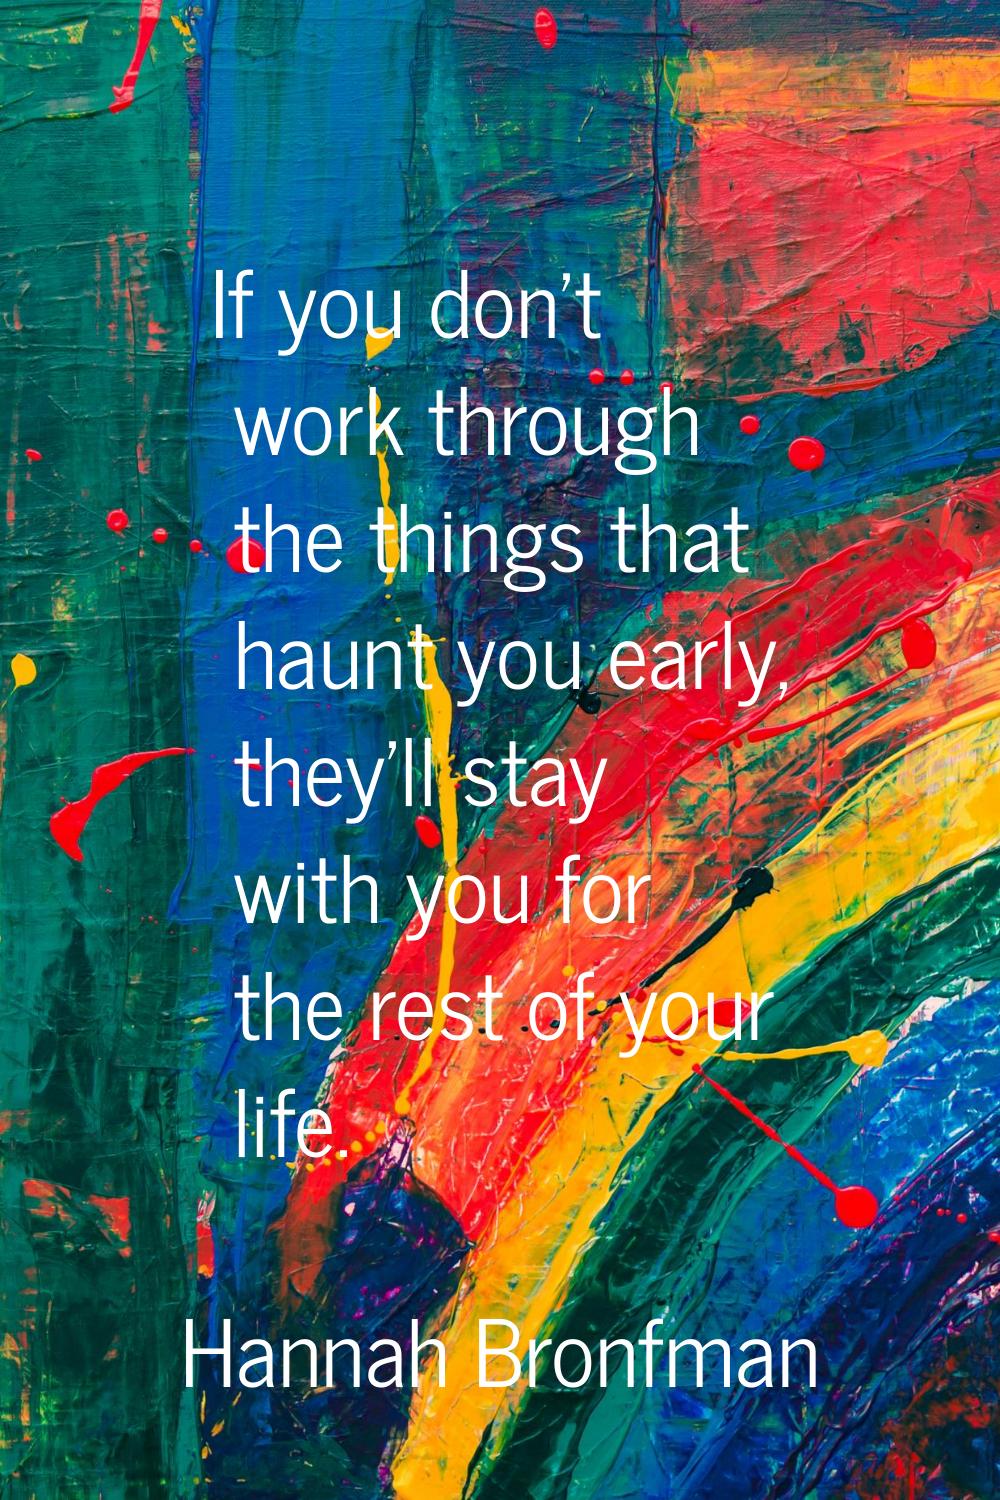 If you don't work through the things that haunt you early, they'll stay with you for the rest of yo